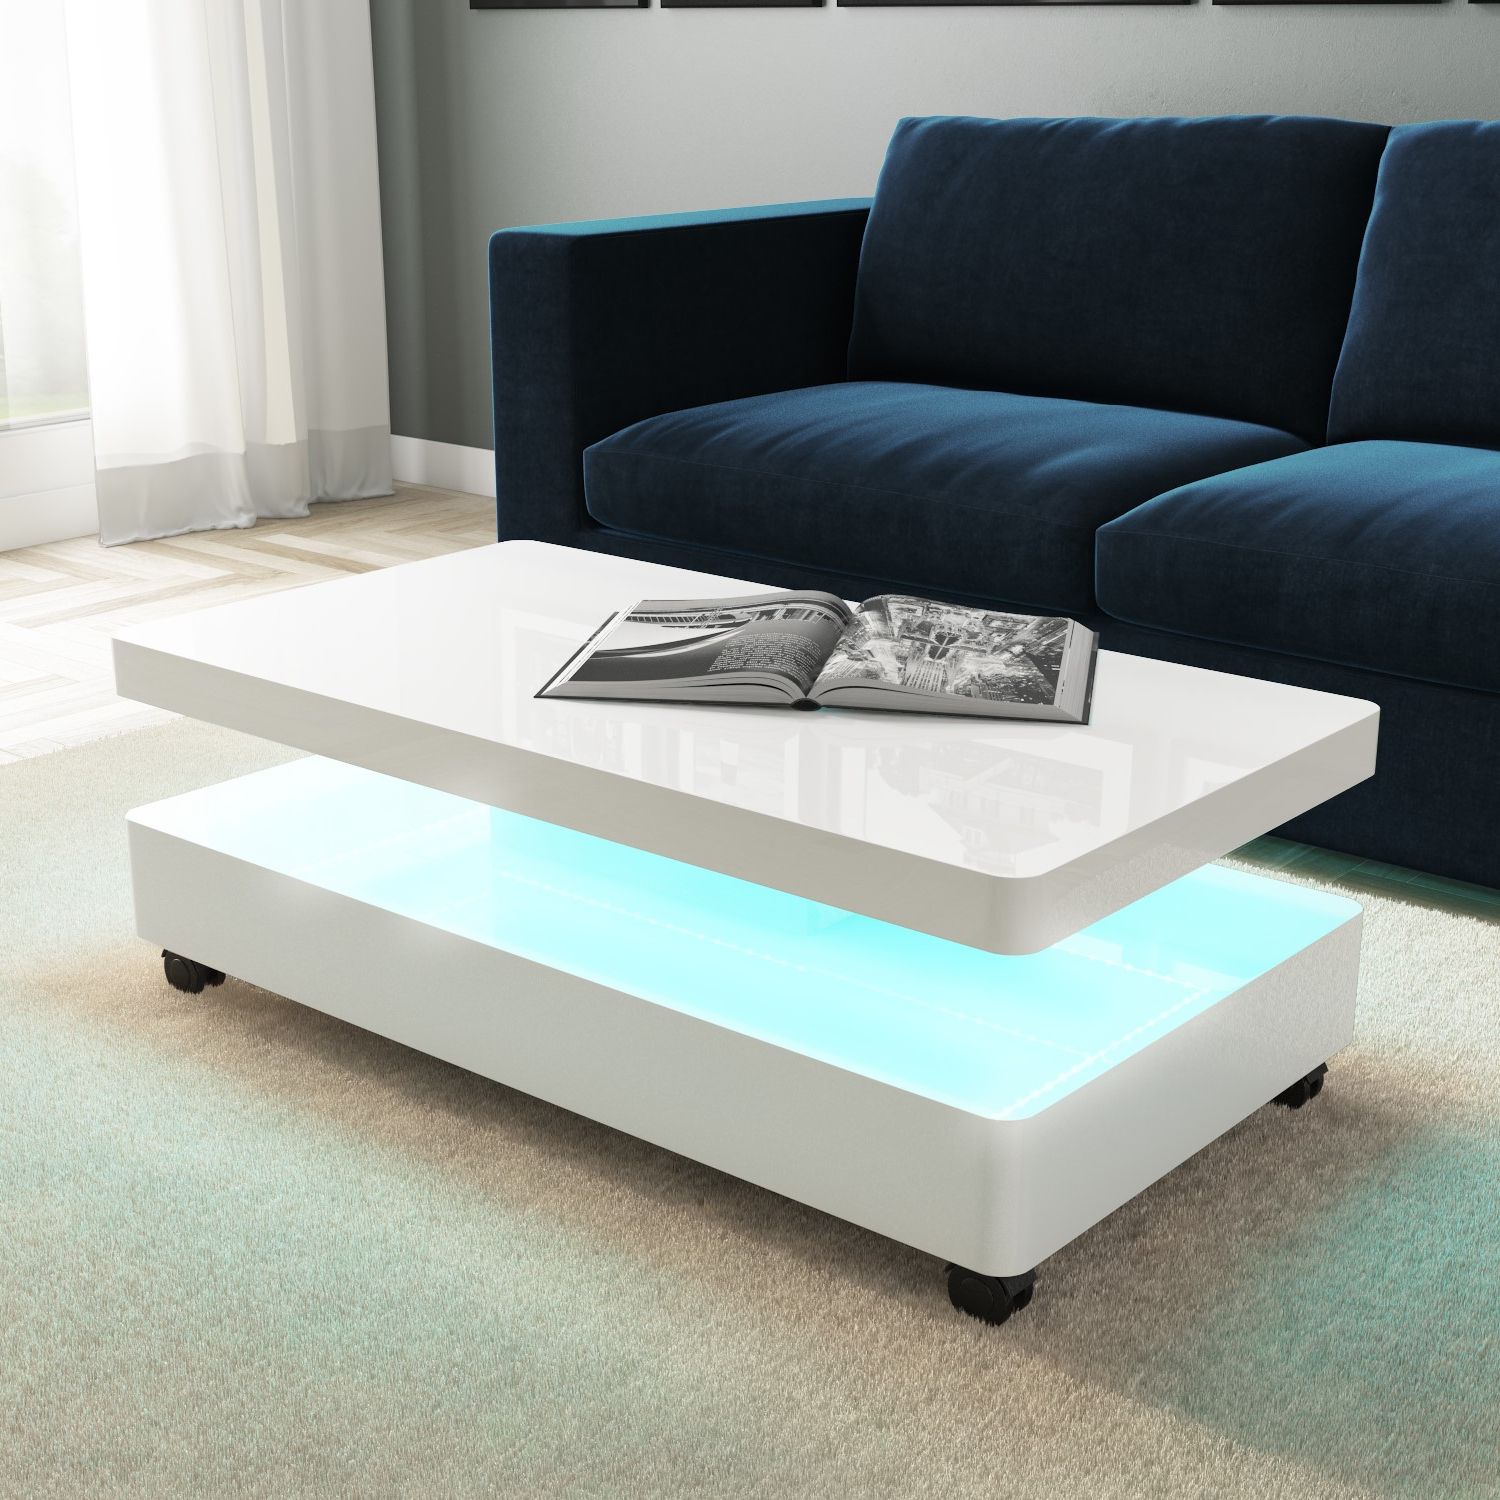 High Gloss White Coffee Table With Led Lighting 5060388562168 | Ebay Regarding Coffee Tables With Led Lights (Gallery 7 of 20)